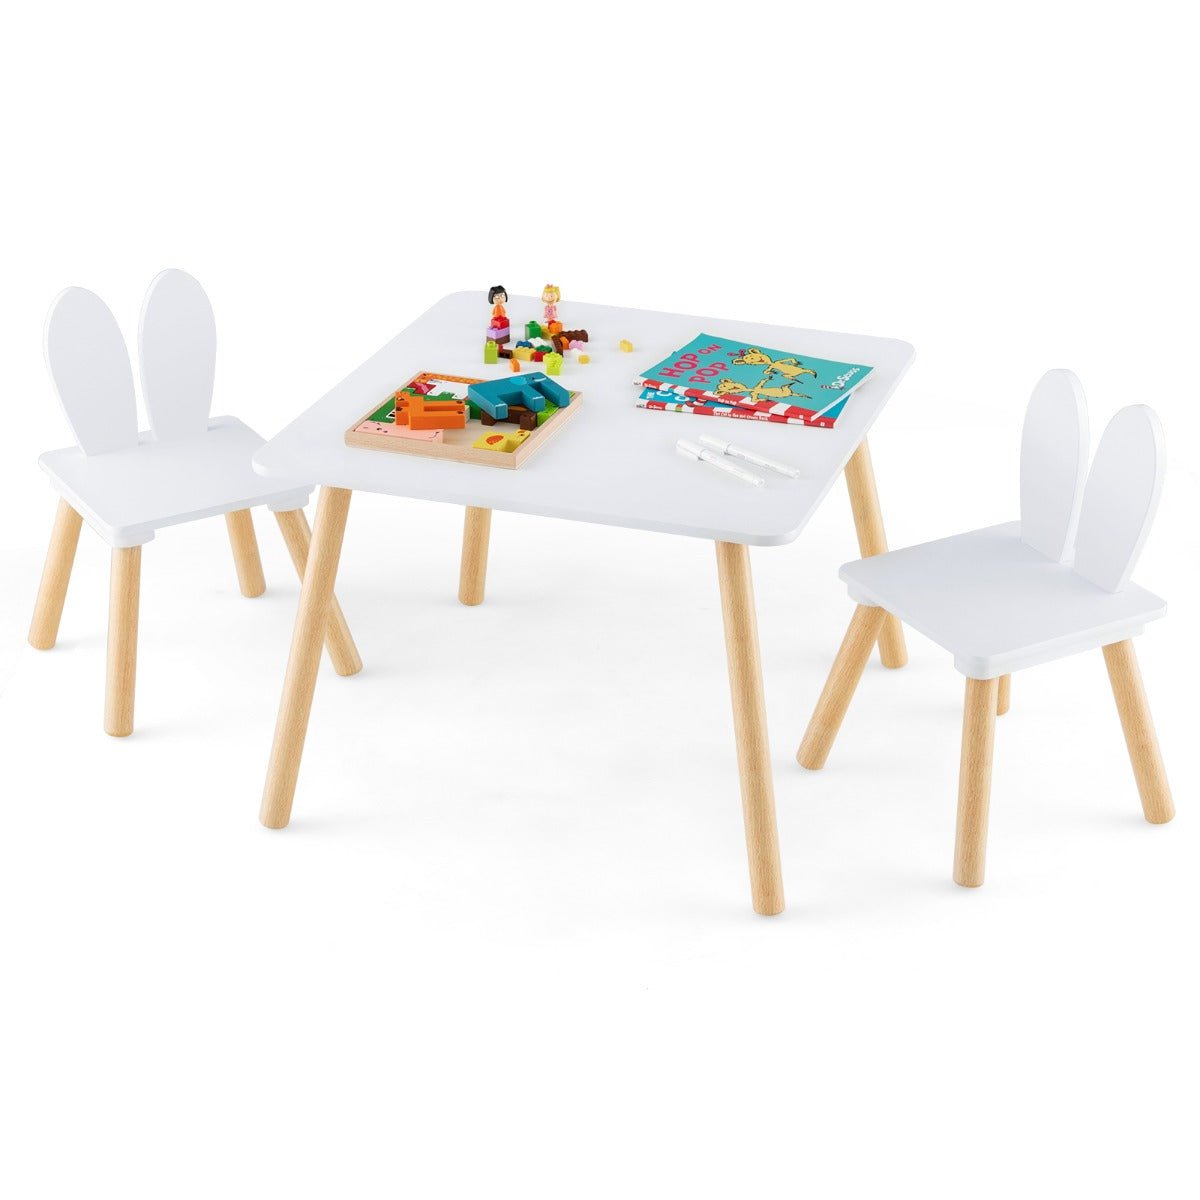 Pink Table with White Bunny-Eared Chairs for Kids Fun - Kids Mega Mart